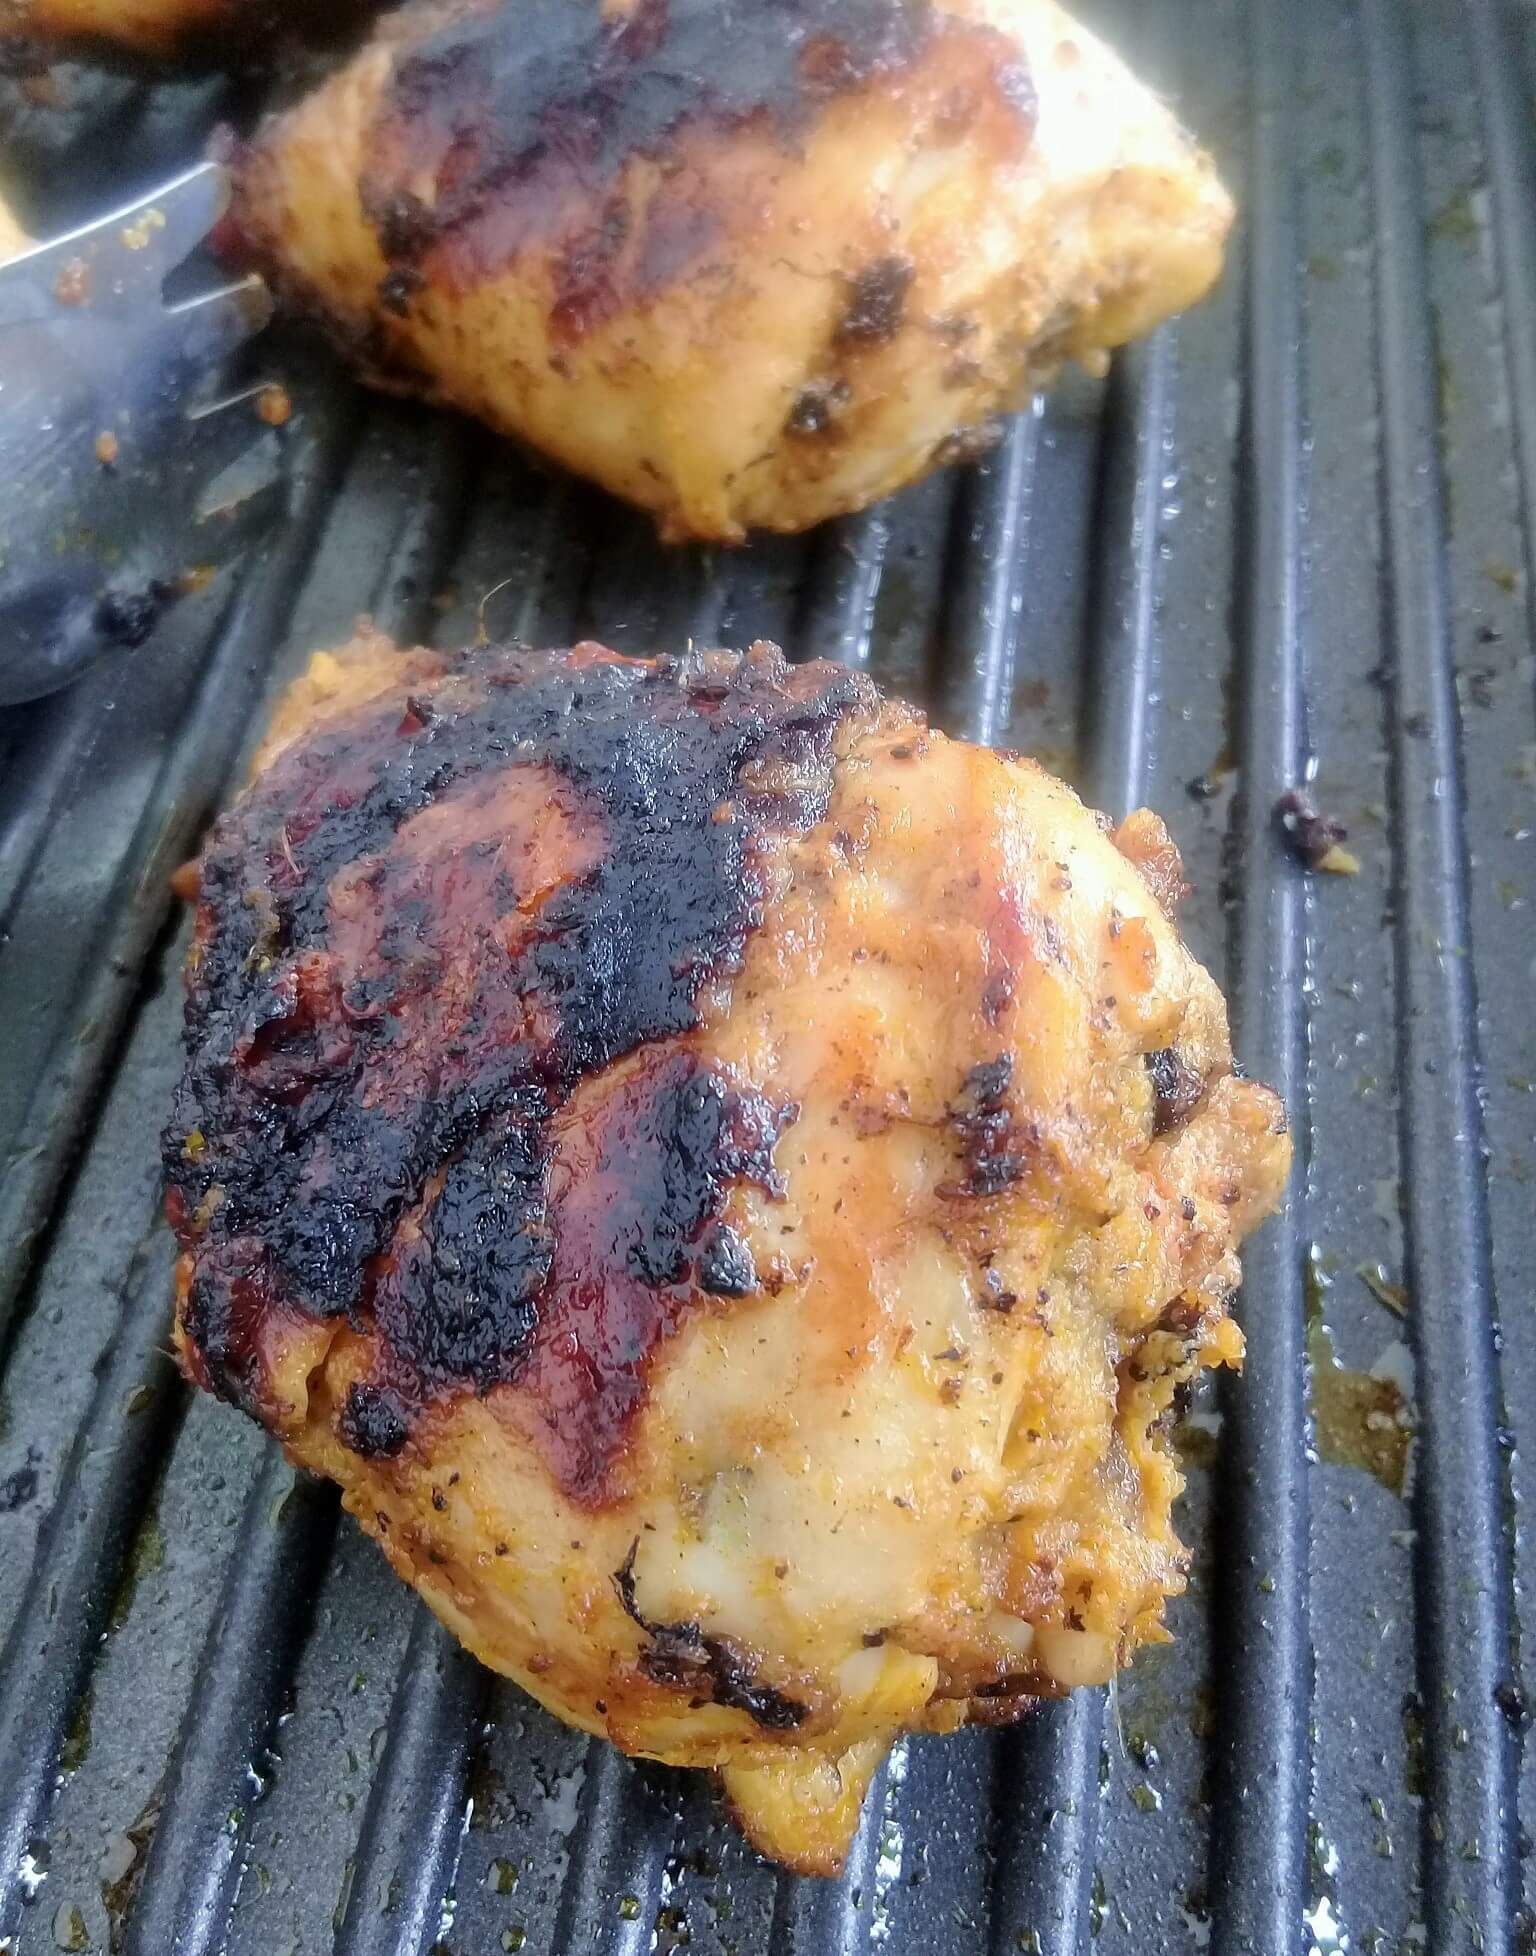 Togolese style grilled chicken biscuits and ladles